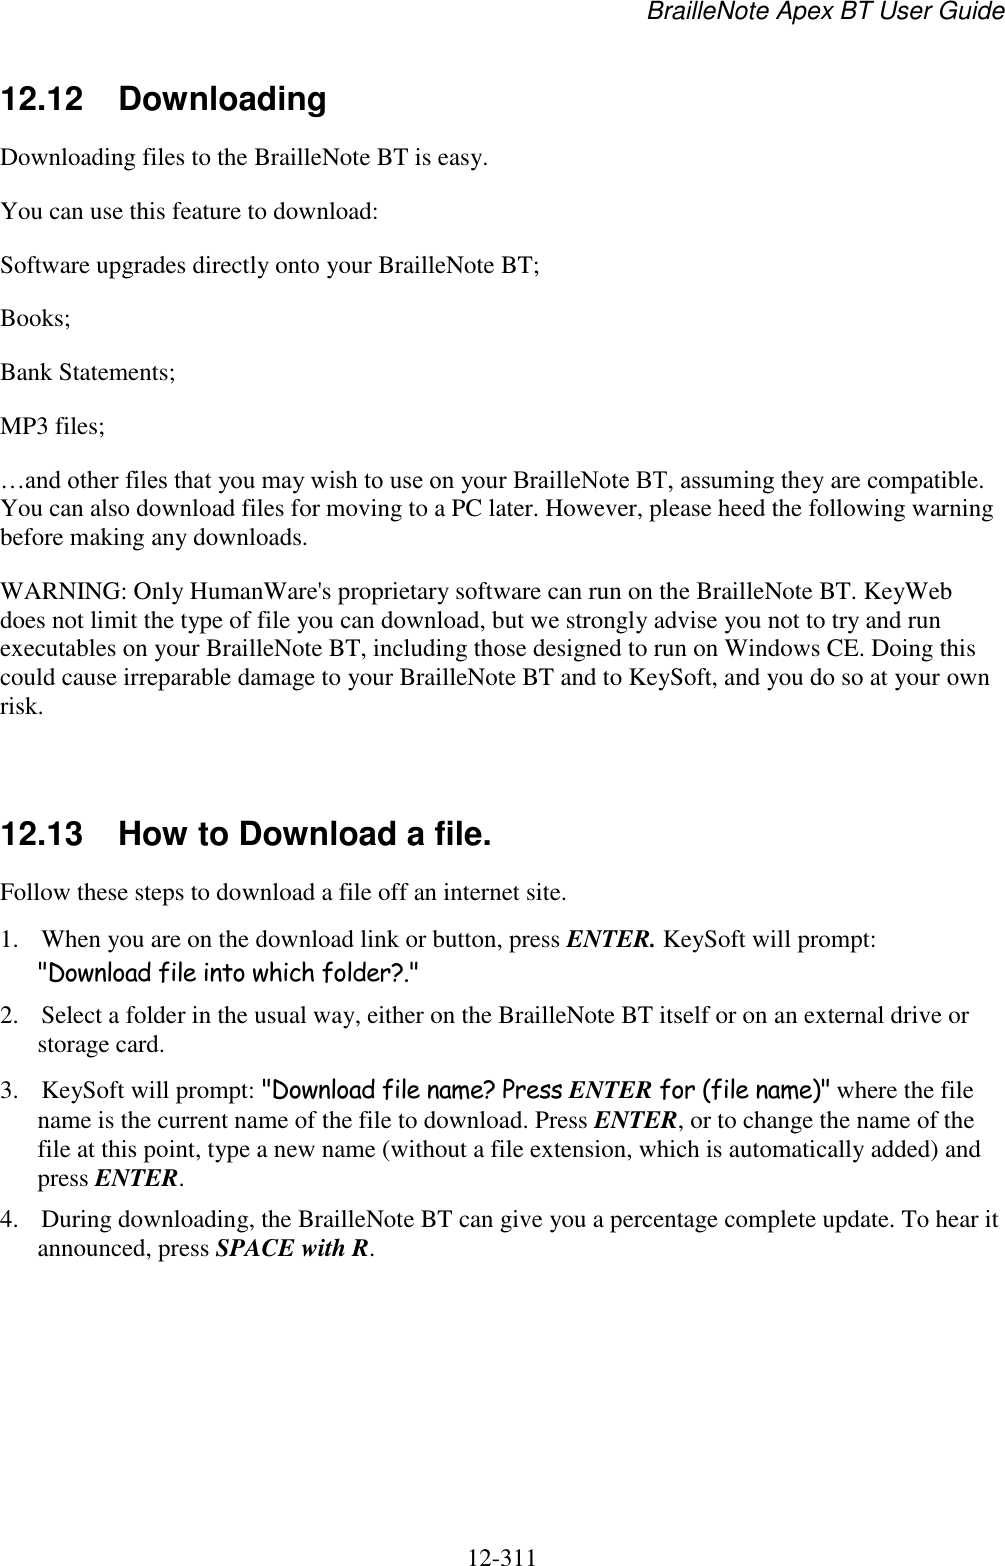 BrailleNote Apex BT User Guide   12-311   12.12  Downloading Downloading files to the BrailleNote BT is easy. You can use this feature to download: Software upgrades directly onto your BrailleNote BT; Books; Bank Statements; MP3 files; …and other files that you may wish to use on your BrailleNote BT, assuming they are compatible. You can also download files for moving to a PC later. However, please heed the following warning before making any downloads. WARNING: Only HumanWare&apos;s proprietary software can run on the BrailleNote BT. KeyWeb does not limit the type of file you can download, but we strongly advise you not to try and run executables on your BrailleNote BT, including those designed to run on Windows CE. Doing this could cause irreparable damage to your BrailleNote BT and to KeySoft, and you do so at your own risk.   12.13  How to Download a file. Follow these steps to download a file off an internet site. 1. When you are on the download link or button, press ENTER. KeySoft will prompt: &quot;Download file into which folder?.&quot; 2. Select a folder in the usual way, either on the BrailleNote BT itself or on an external drive or storage card. 3. KeySoft will prompt: &quot;Download file name? Press ENTER for (file name)&quot; where the file name is the current name of the file to download. Press ENTER, or to change the name of the file at this point, type a new name (without a file extension, which is automatically added) and press ENTER. 4. During downloading, the BrailleNote BT can give you a percentage complete update. To hear it announced, press SPACE with R. 